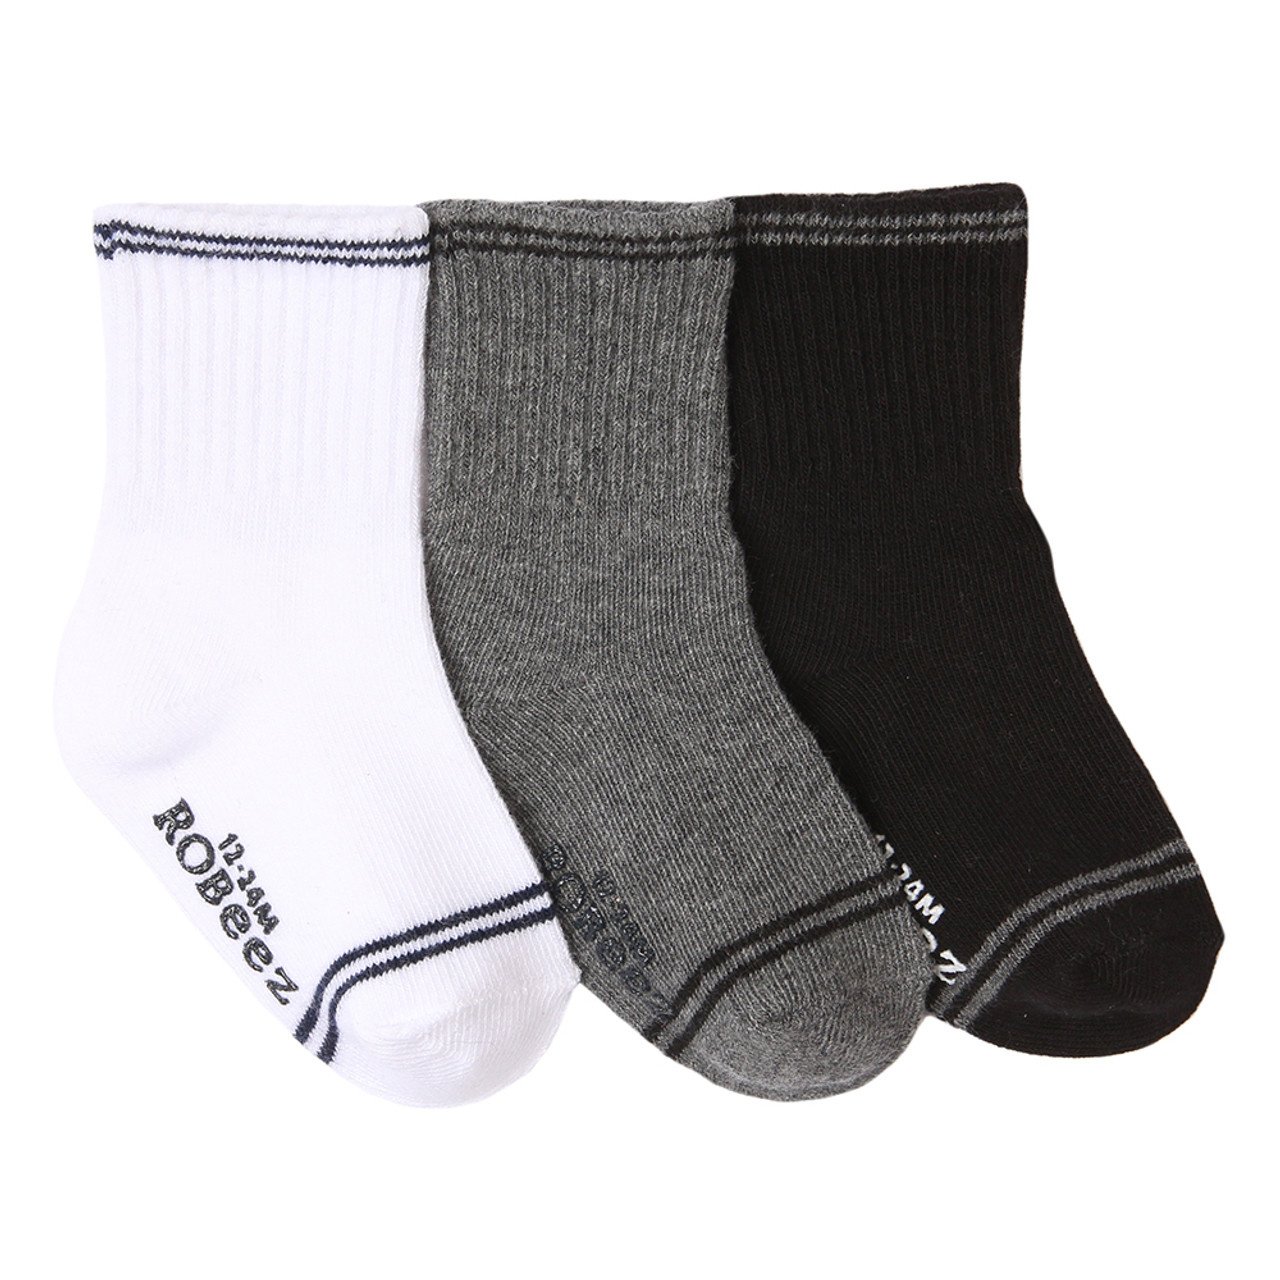 Robeez 3pk Socks - Goes with Everything